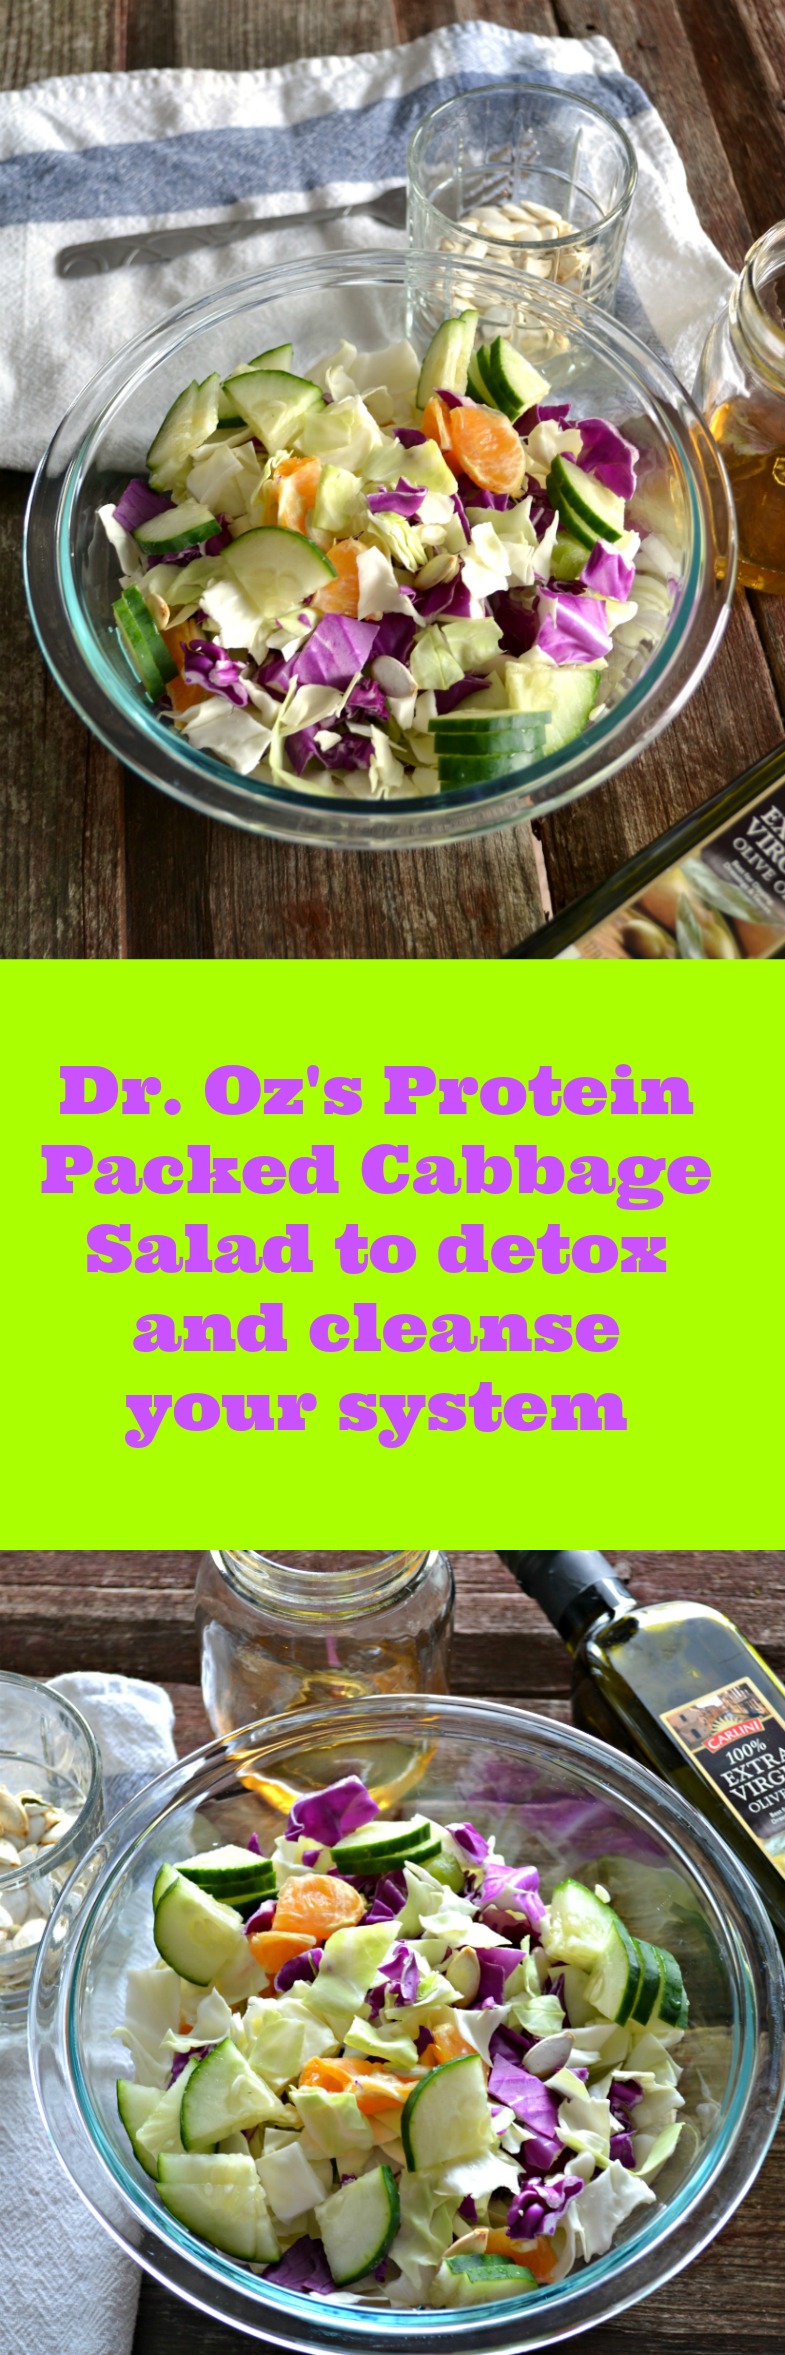 Dr. Oz's Protein Packed Cabbage Salad to detox and cleanse your system. You will actually feel fuller longer, and flush your system with this natural dietetic salad that will give you more energy in the middle of the day. A natural weightloss lunch idea.